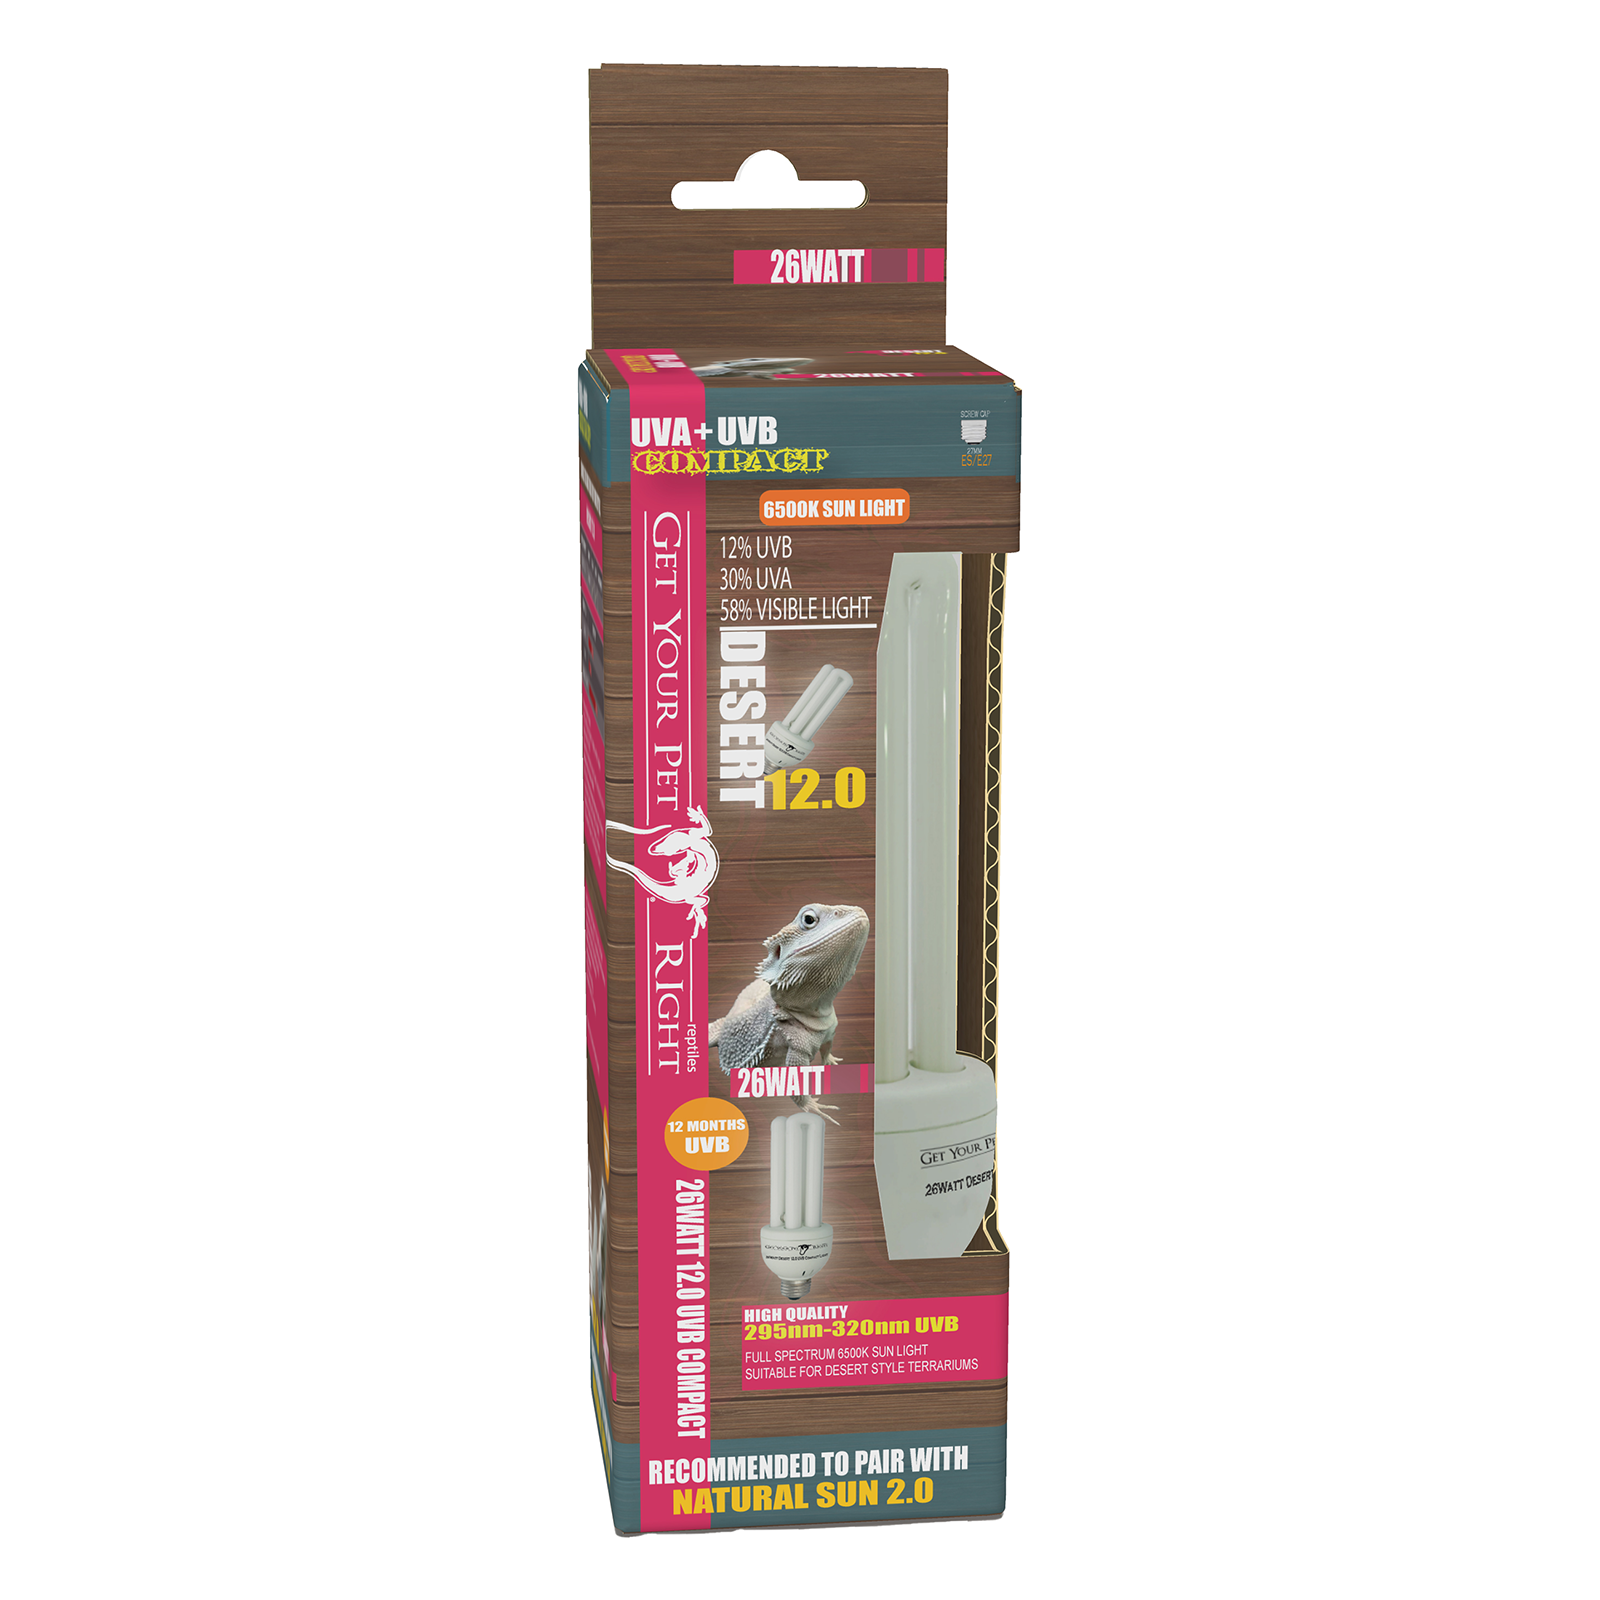 Get Your Pet Right Compact UVB Light